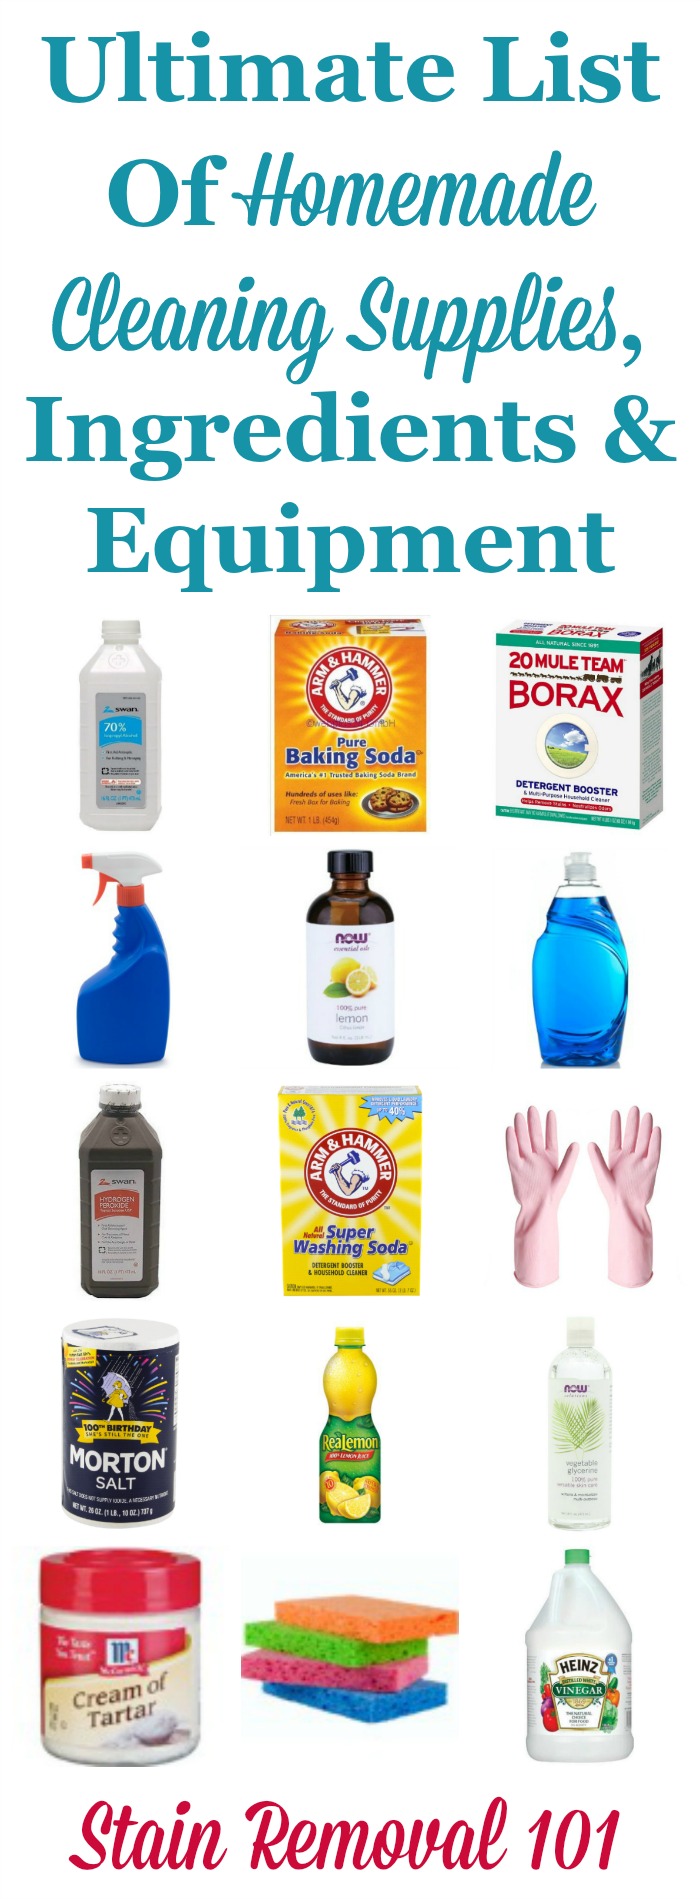 Household cleaning item samples